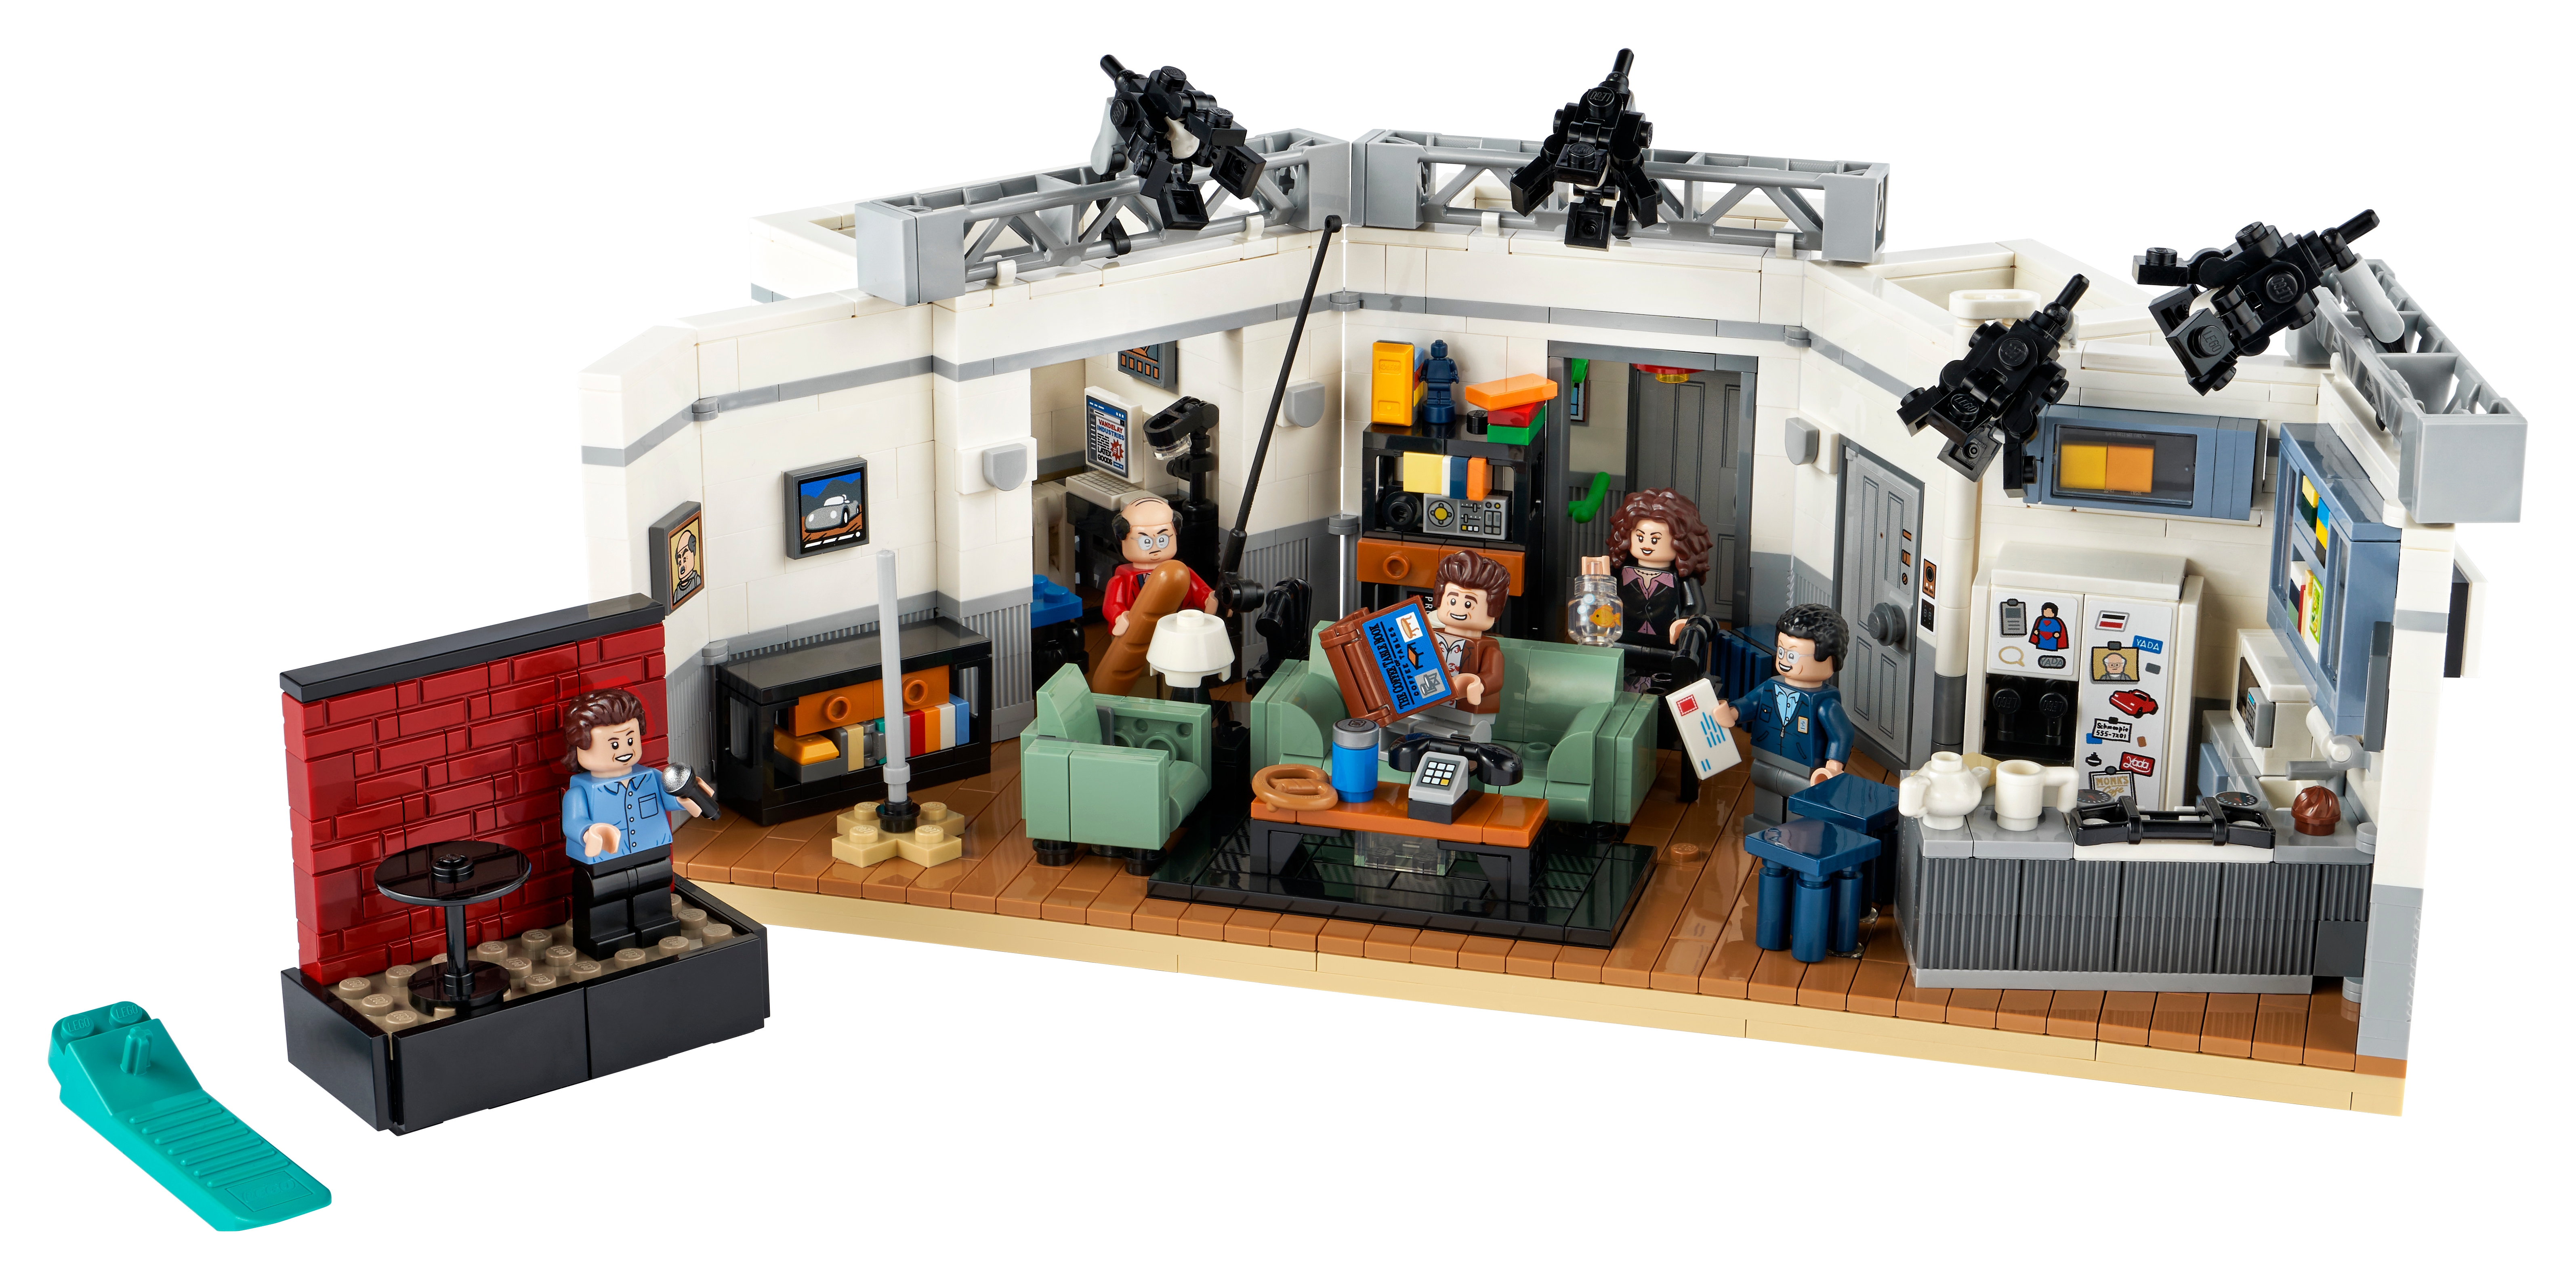 Seinfeld 21328 | | Buy online at Official LEGO® Shop US